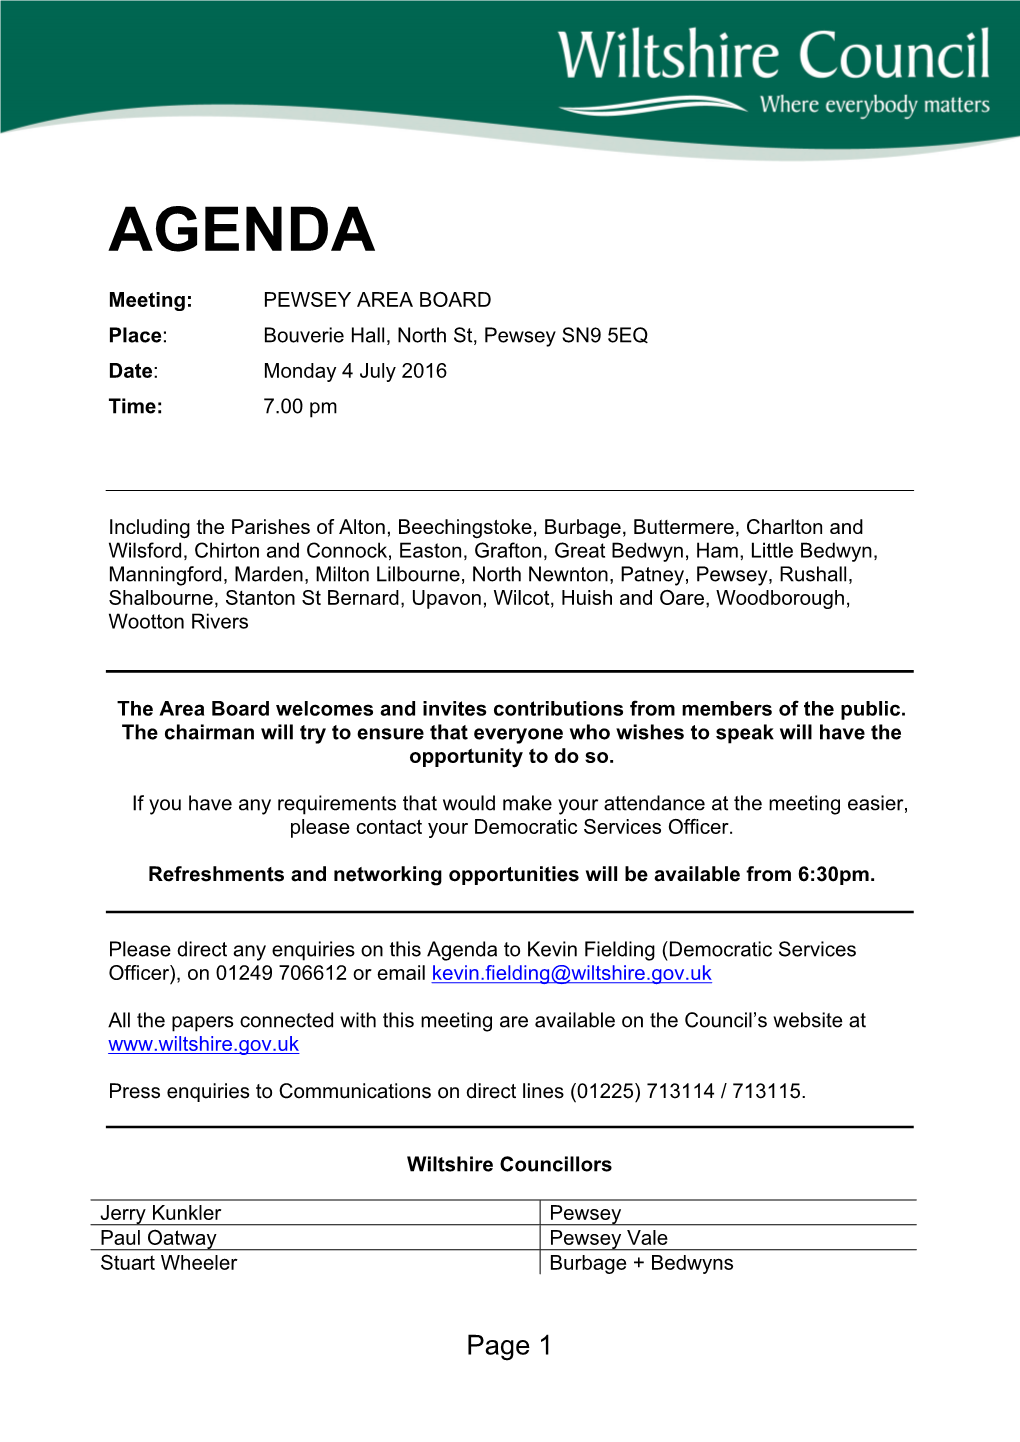 (Public Pack)Agenda Document for Pewsey Area Board, 04/07/2016 19